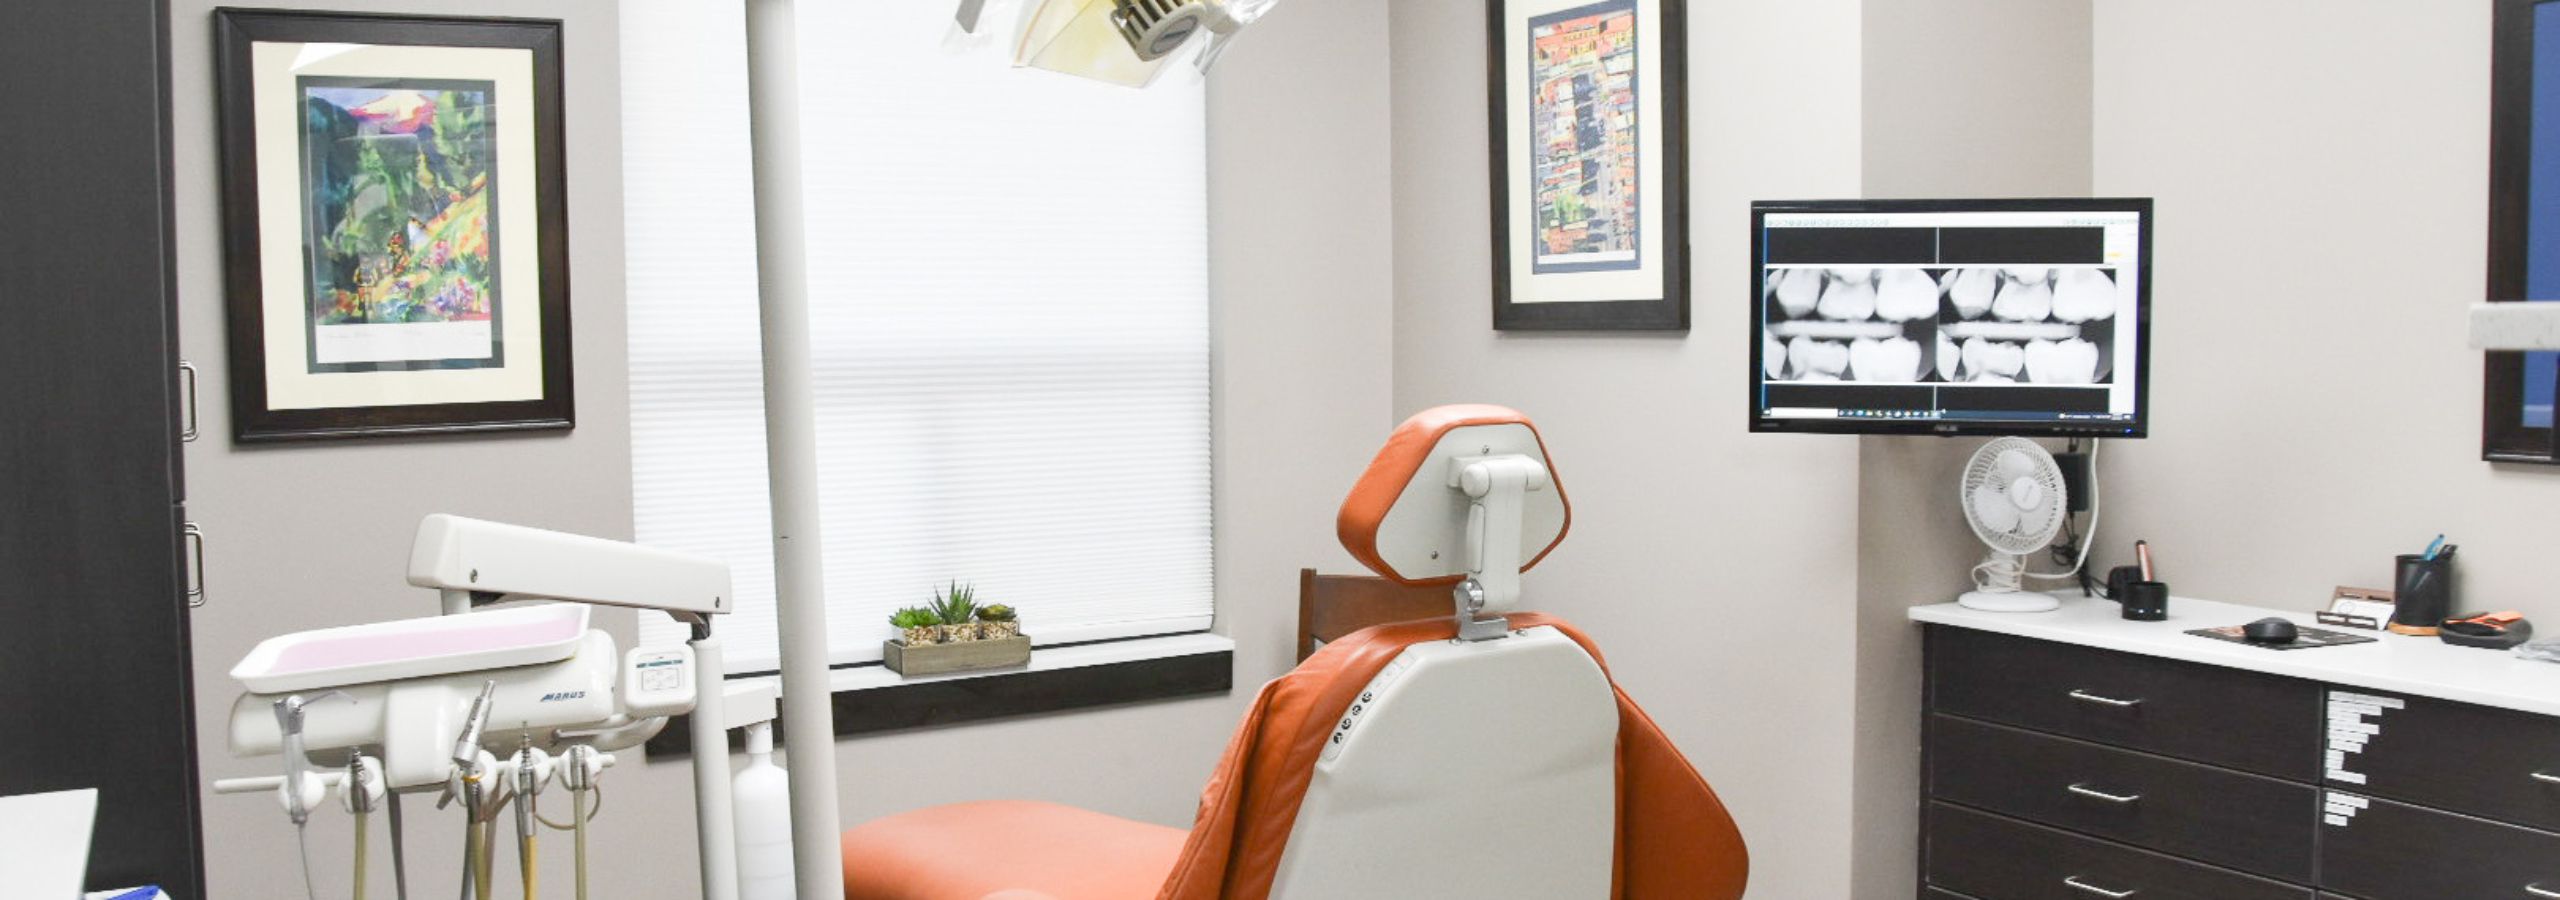 Image of the inside of the dental office for Mt. Ogden Dental & Implant Clinic; an exam room and dental chair is shown.